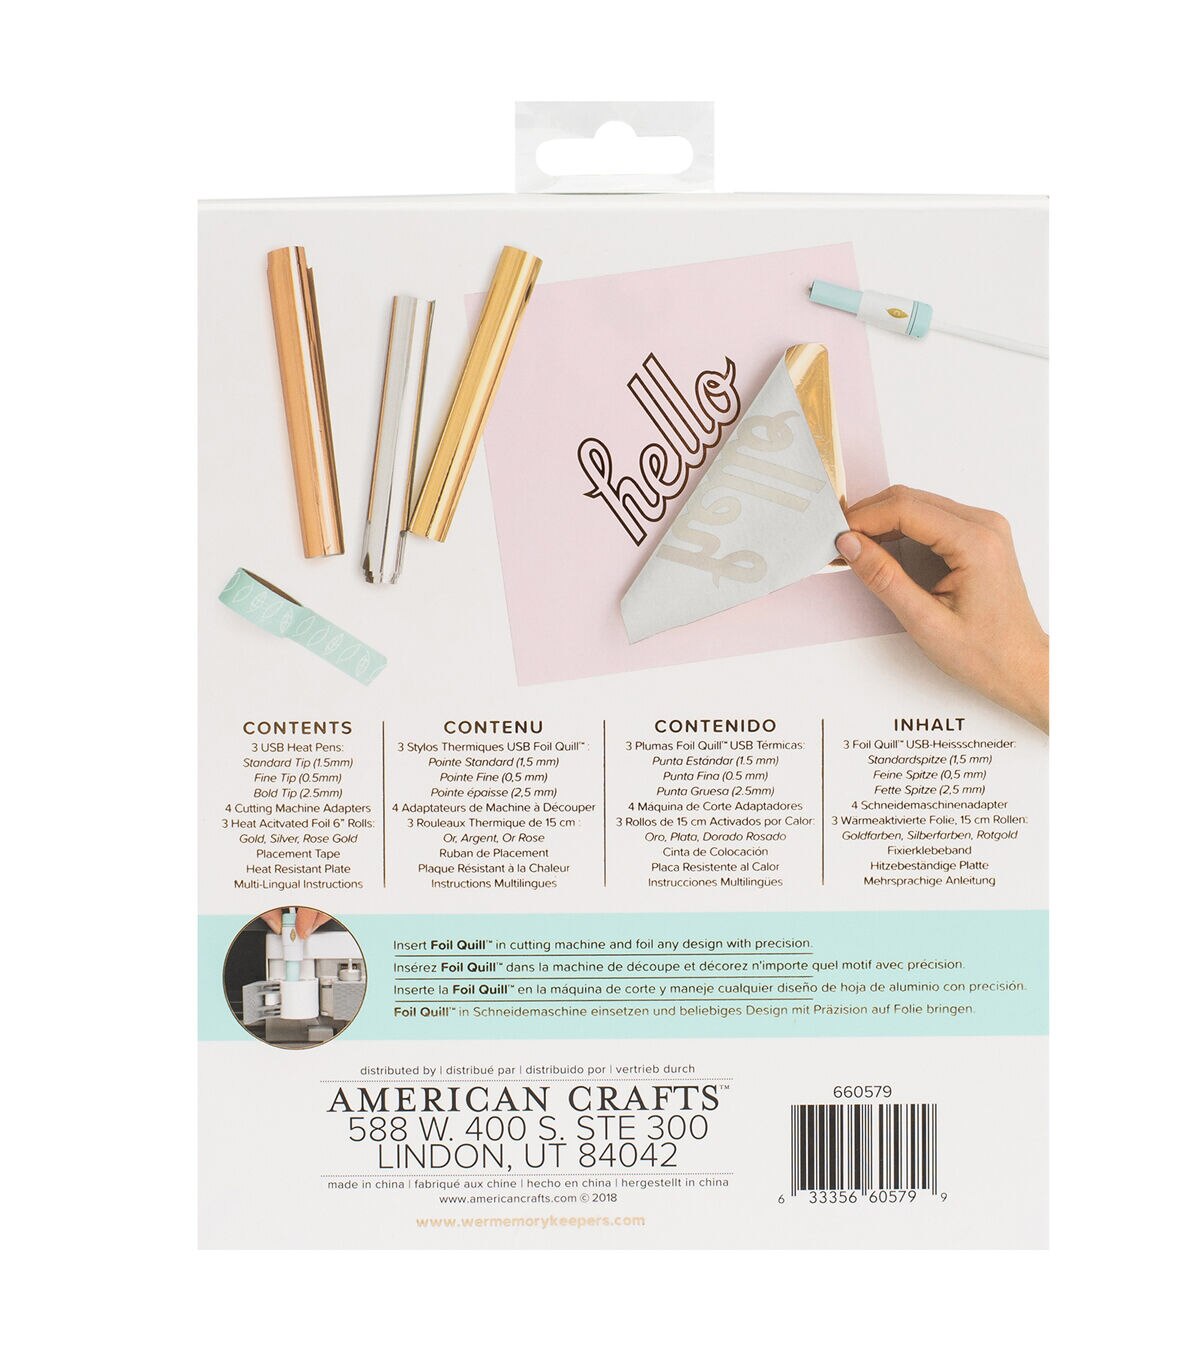 We R Memory Keepers American Crafts 14 x 5 Foil Quill Cutting Kit-DIY Crafting Set-Pack of 3 